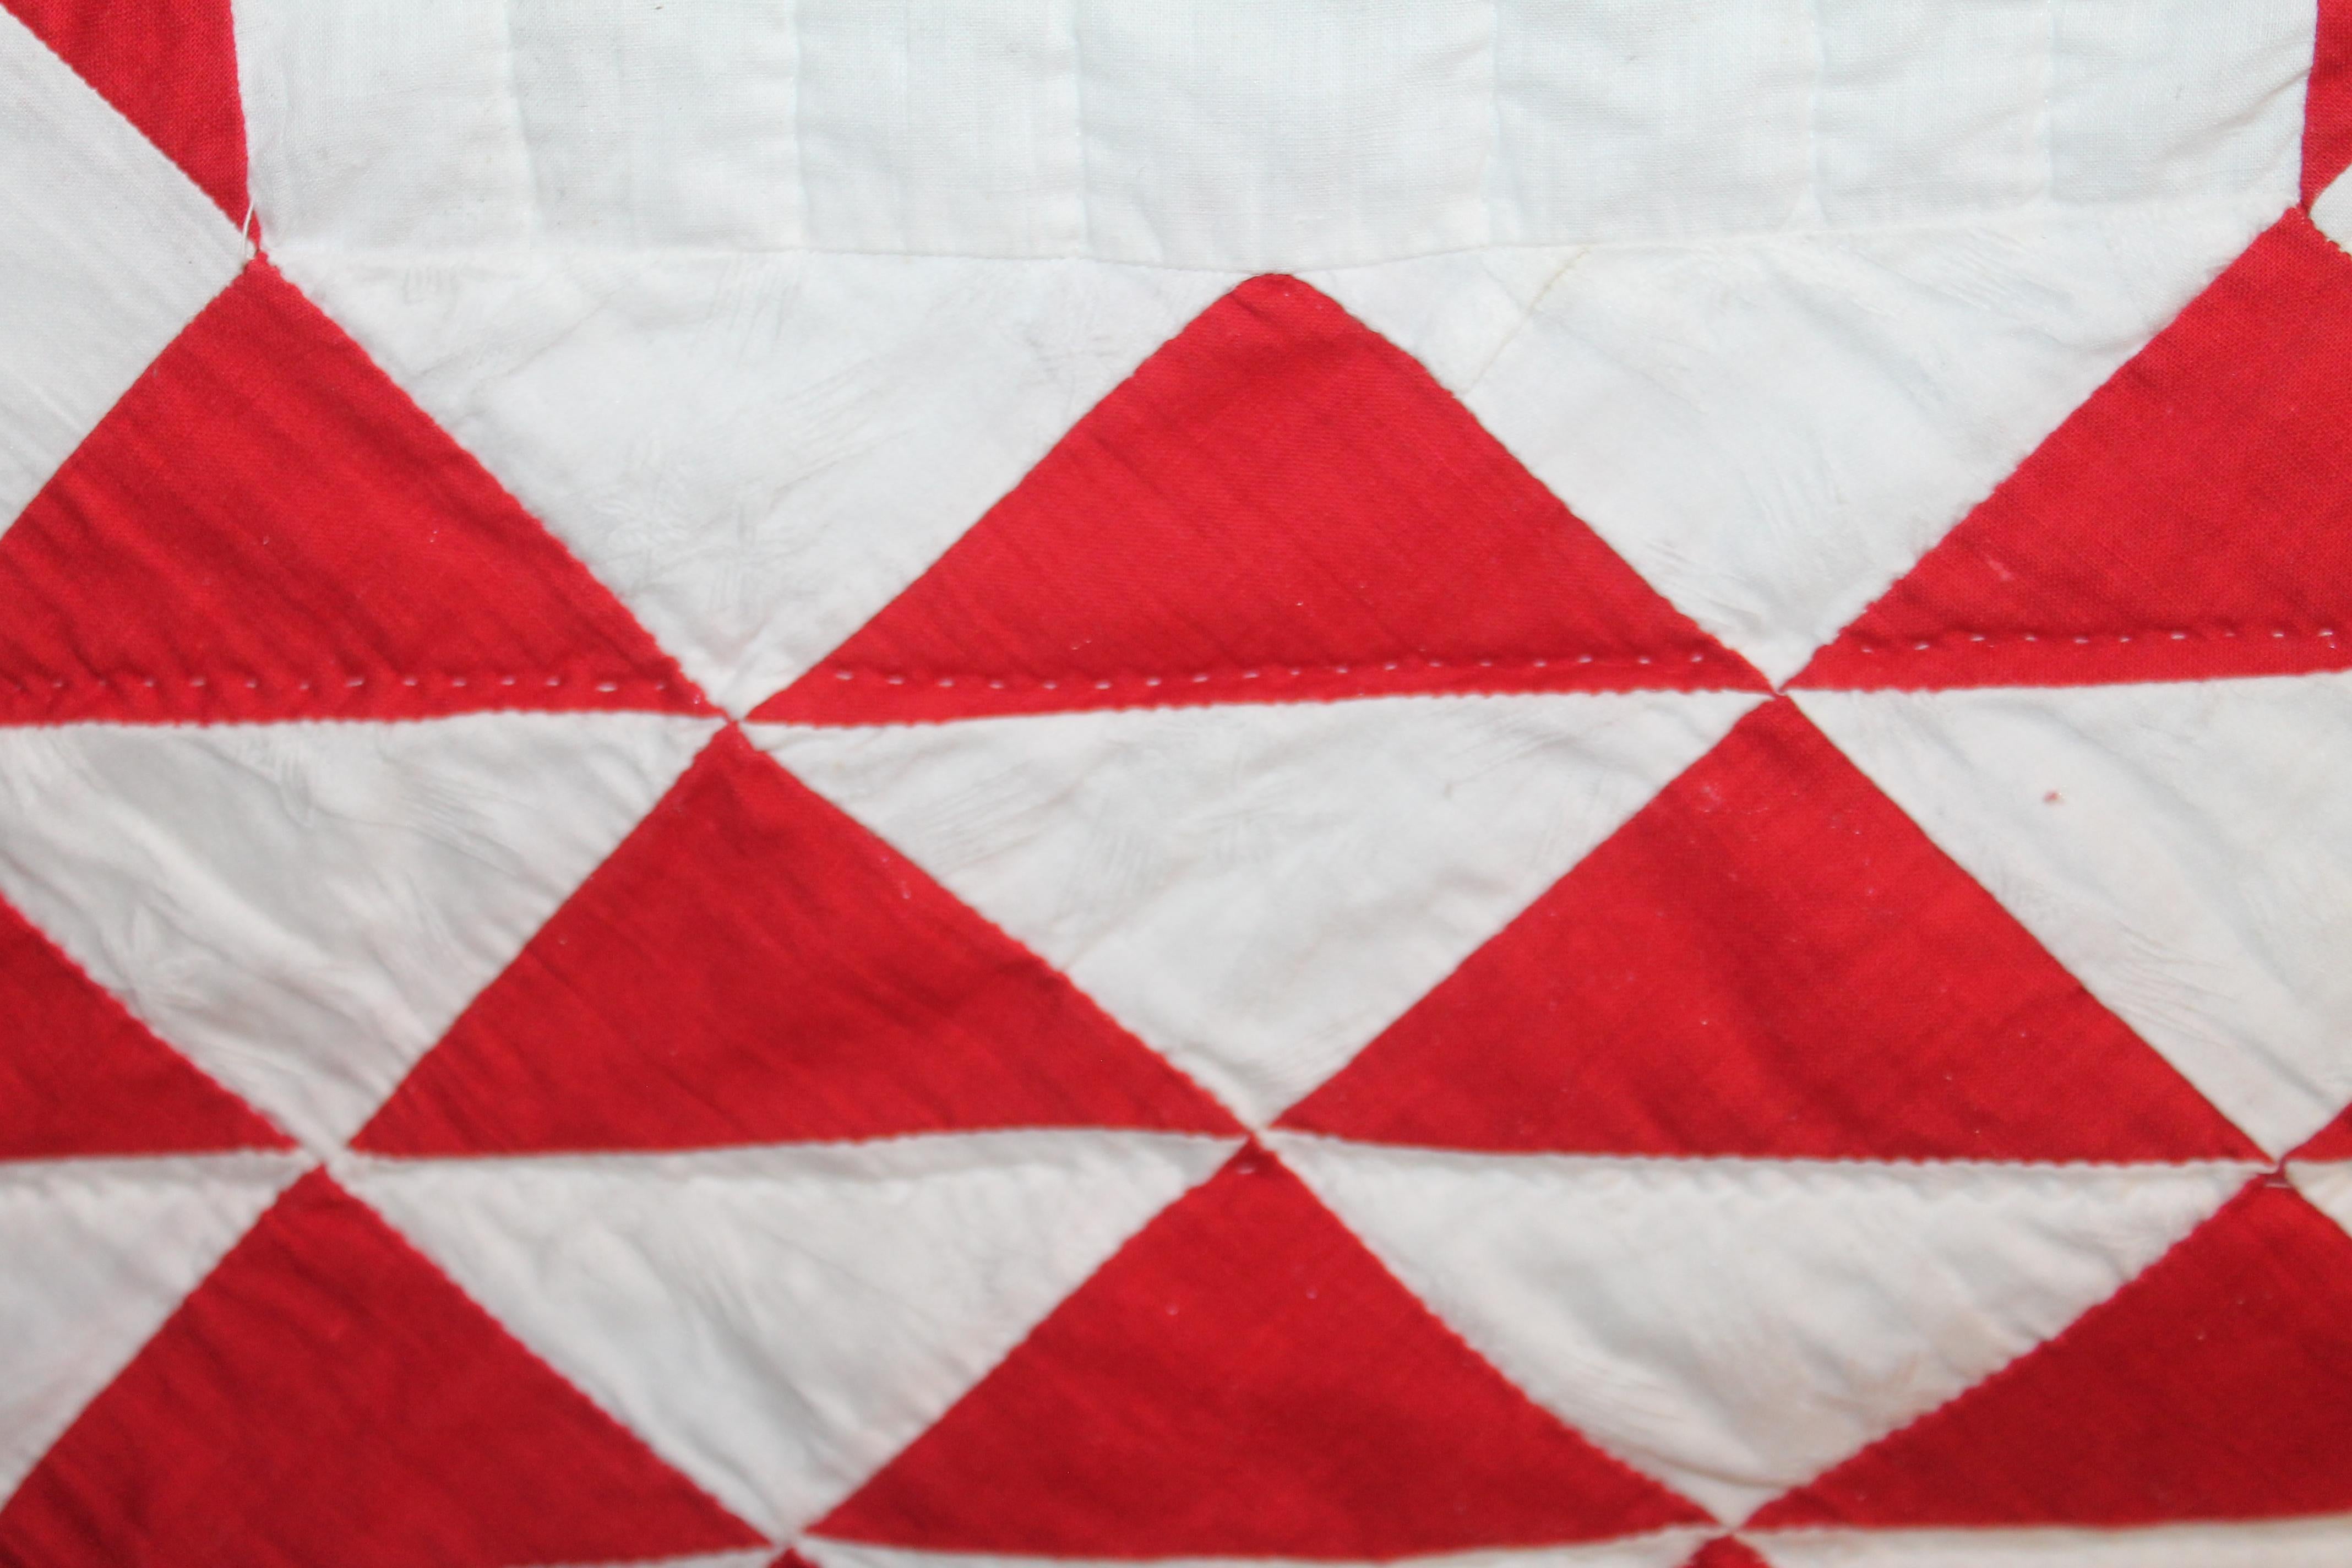 Adirondack Early 20th Century Red and White Ocean Waves Quilt